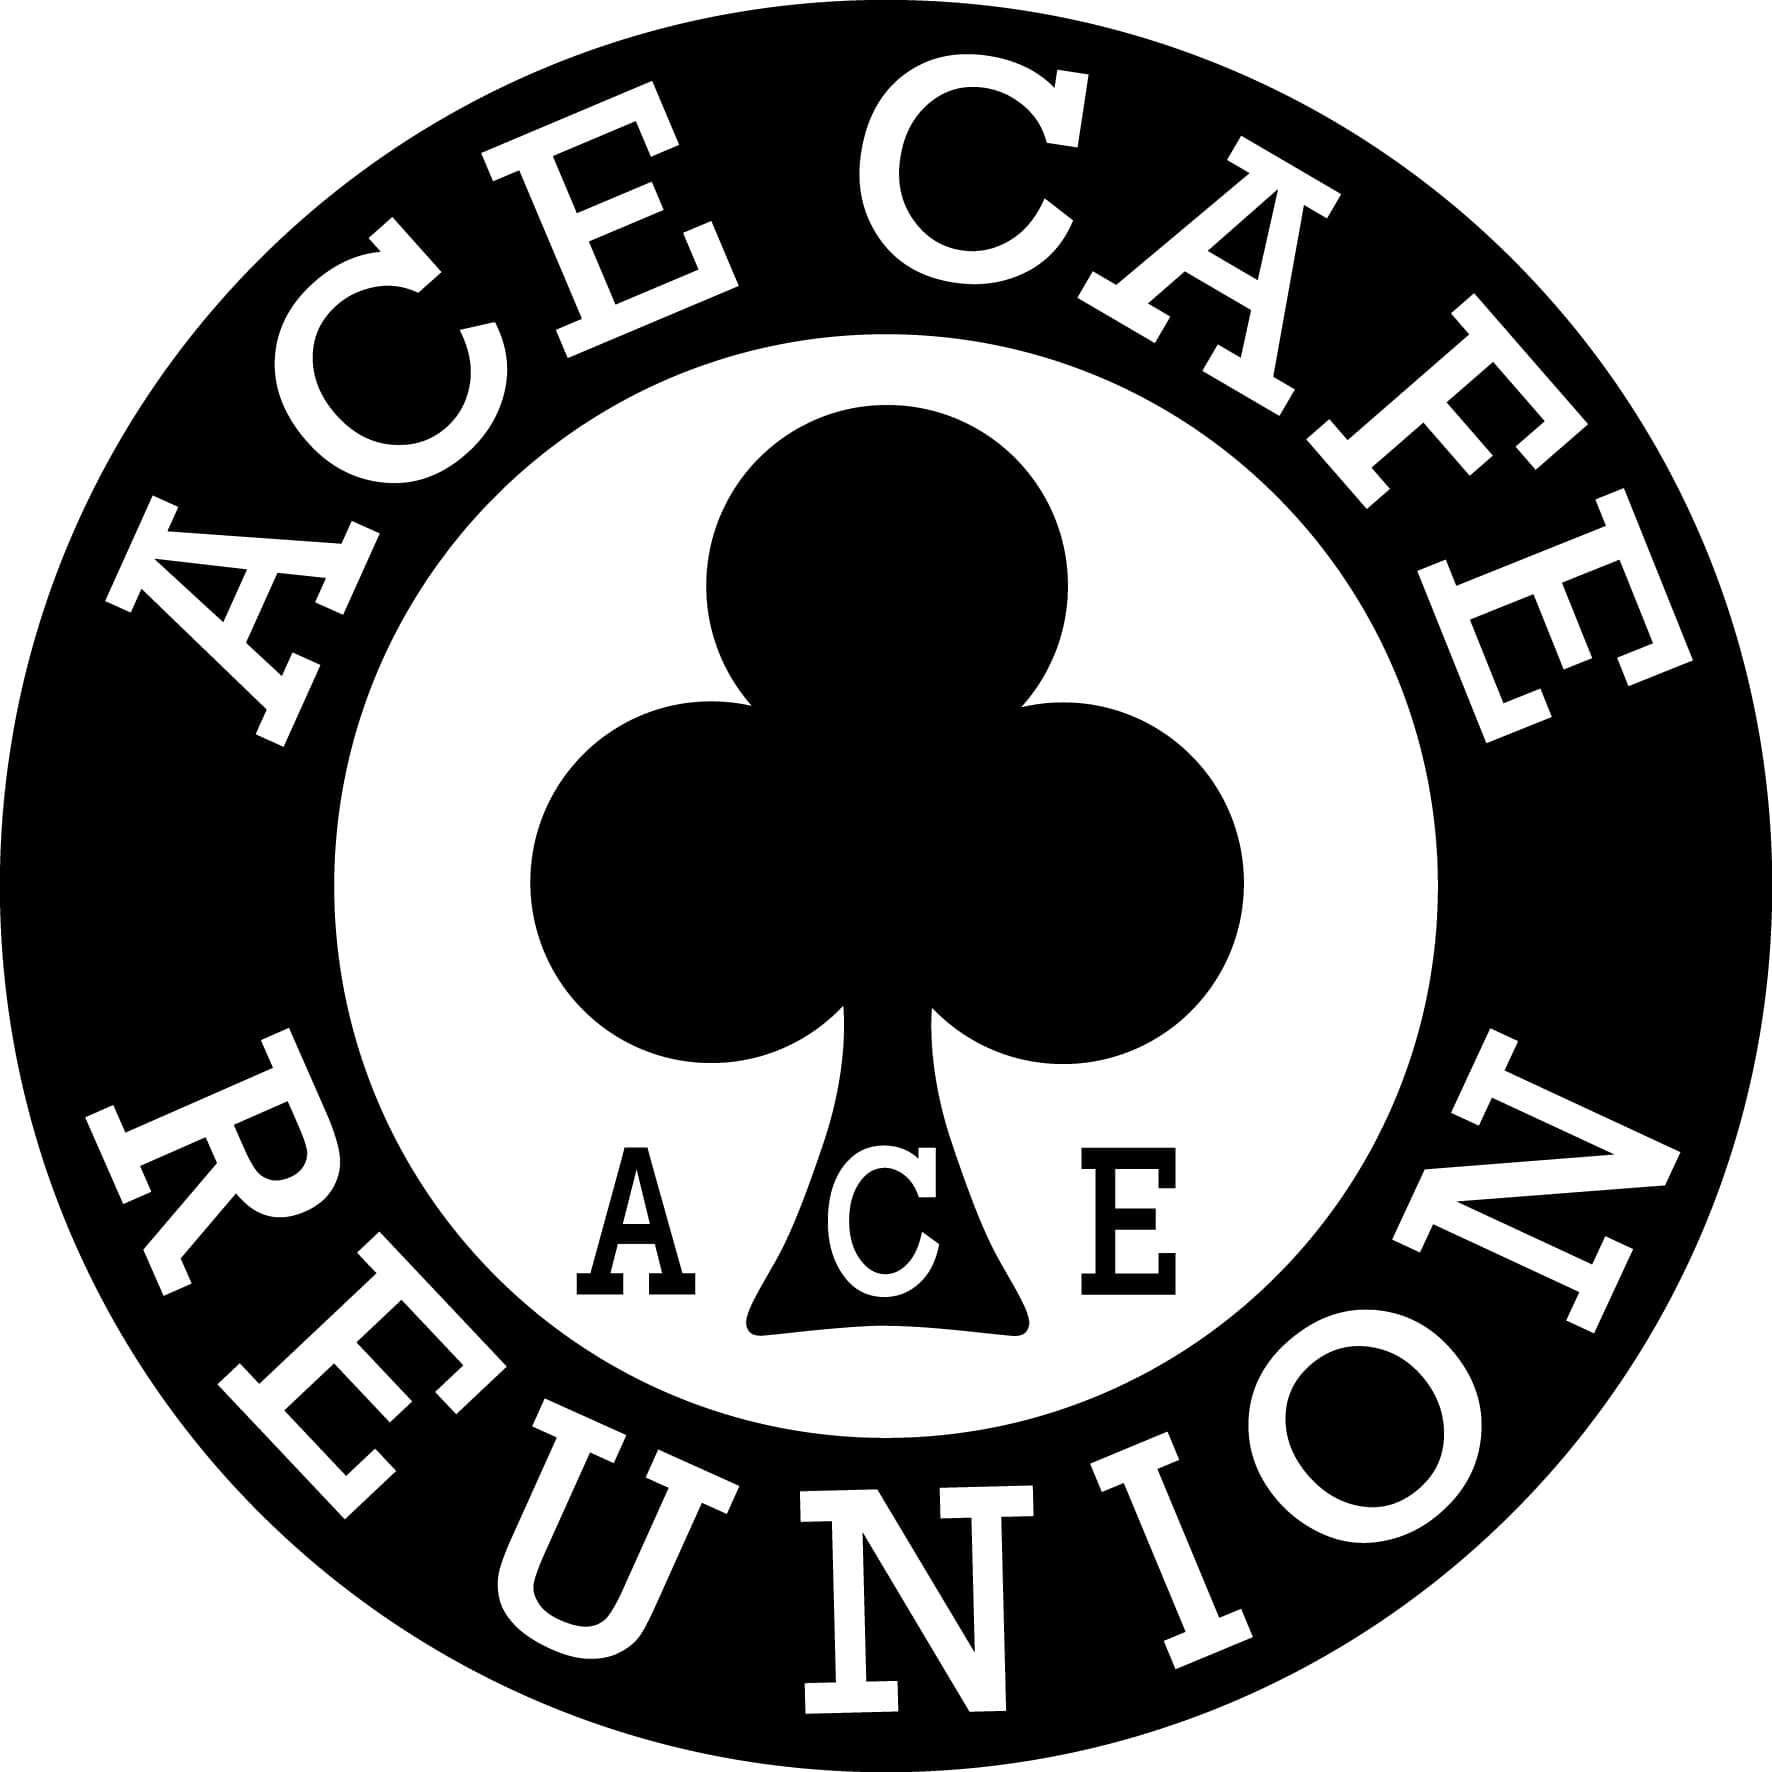 The 24Th Annual Ace Cafe Reunion Friday 8Th And Saturday 9Th September 2017 At The Cafe. Sunday 10Th September Brighton Burn Up Three Days, Three Rides, Hdpng.com  - Ace Cafe London Vector, Transparent background PNG HD thumbnail